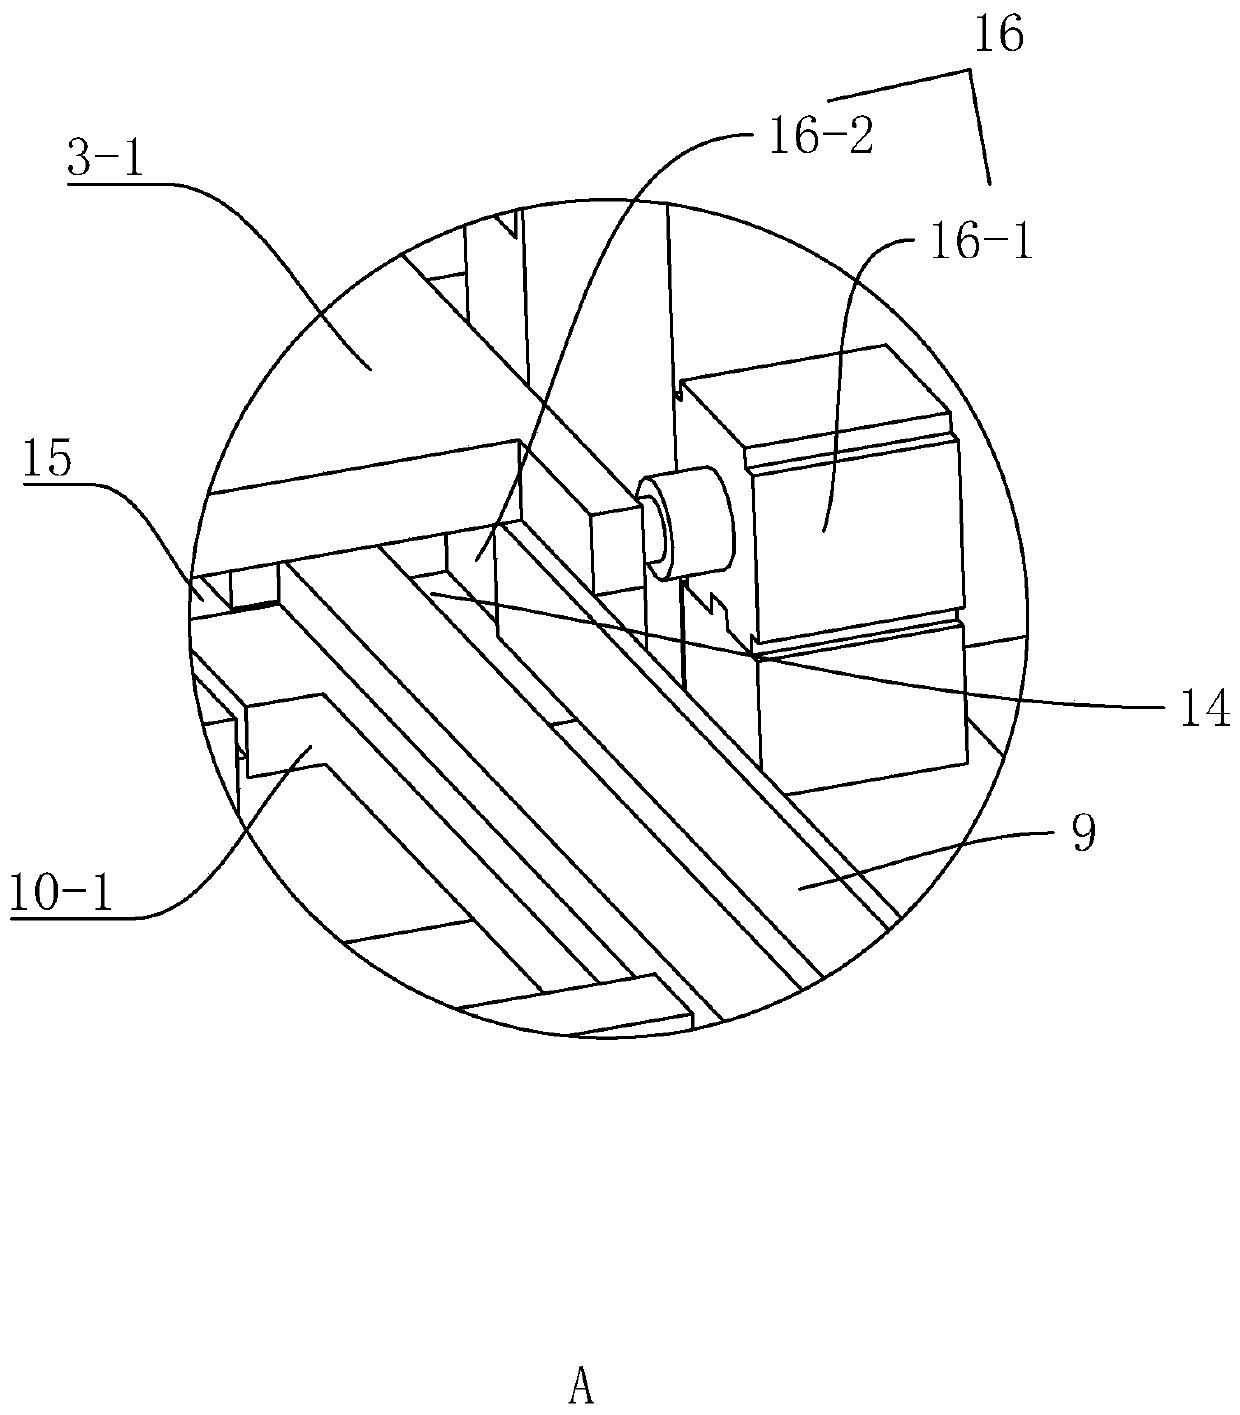 A mounting device for connector pins